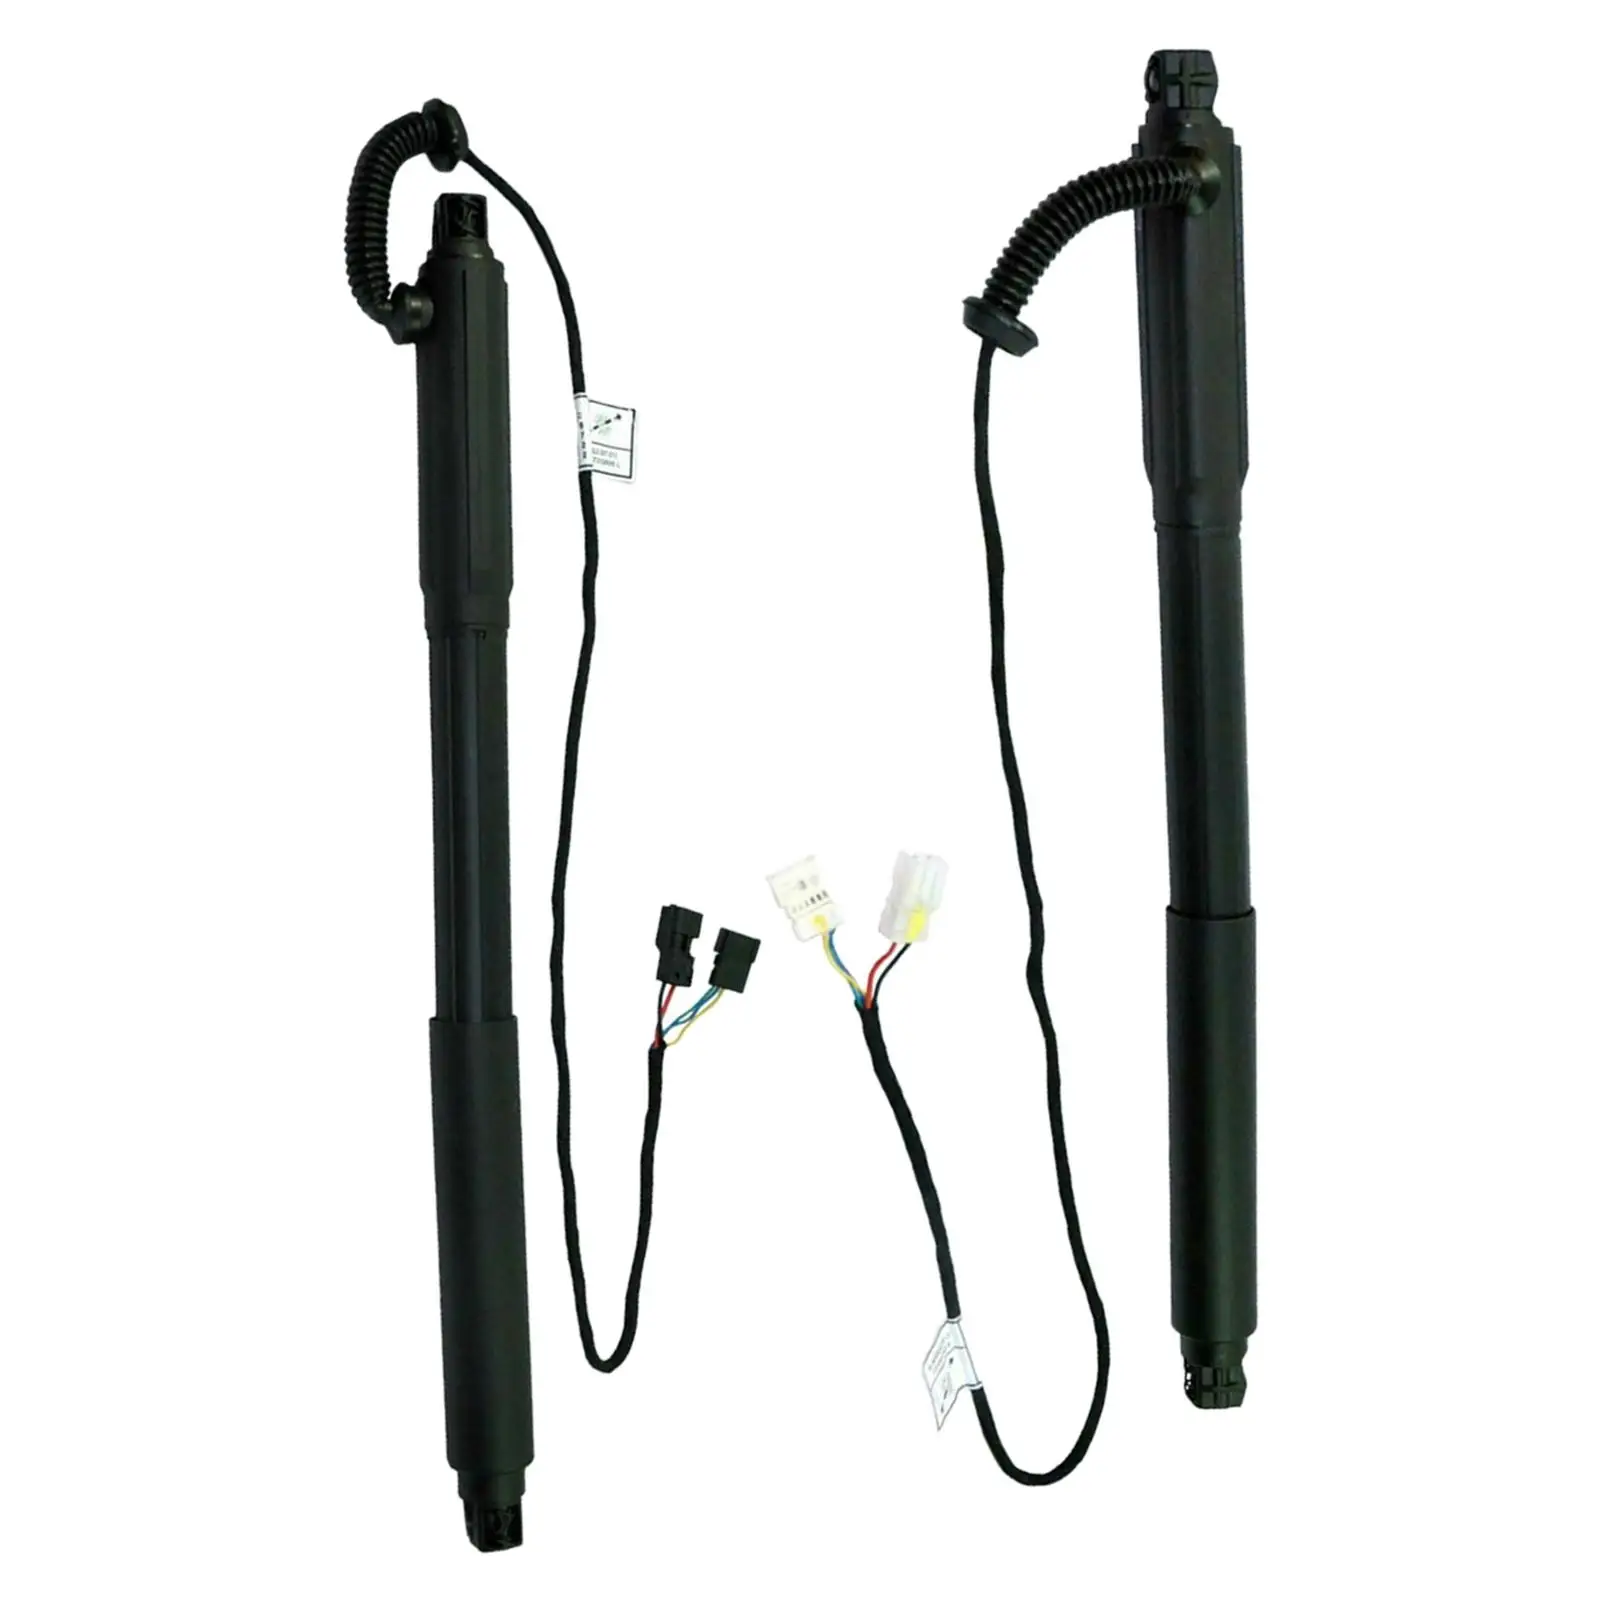 

2 Pieces Car Rear Left and Right Lift Support Accessories Supplies for BMW E70/E70LCI 07-13 4-DOOR 51247332695 51247332696